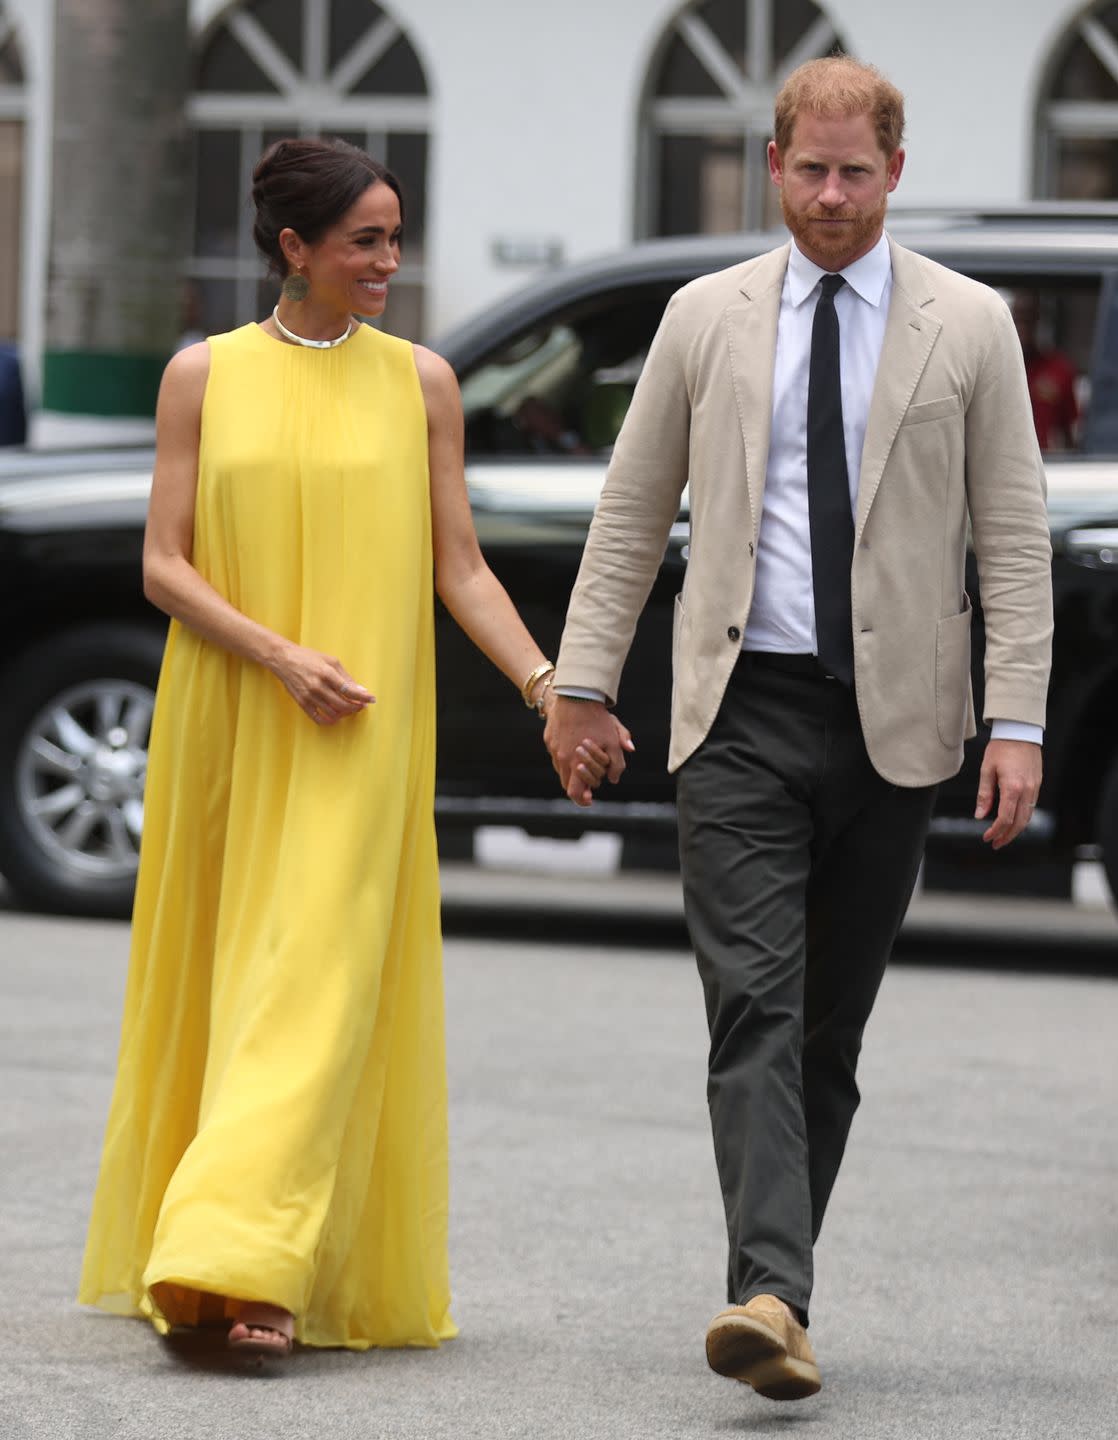 britain's meghan l, duchess of sussex, and britain's prince harry r, duke of sussex arrive at the state governor house in lagos on may 12, 2024 as they visit nigeria as part of celebrations of invictus games anniversary photo by kola sulaimon afp